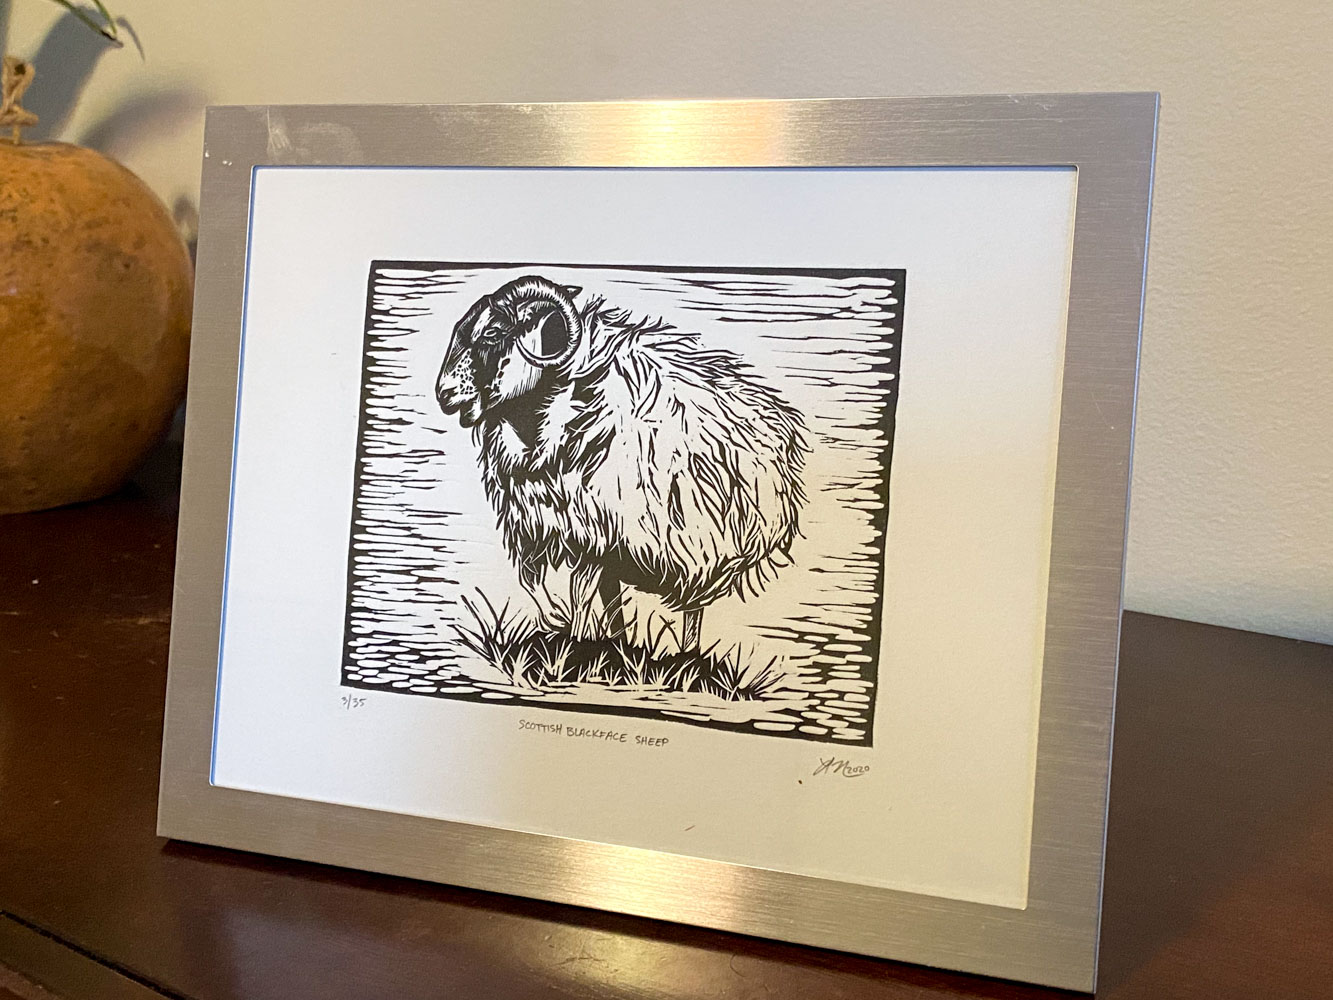 A sheep print displayed in a shiny metal frame. The frame is propped up on a wooden desk with a white wall in the background.